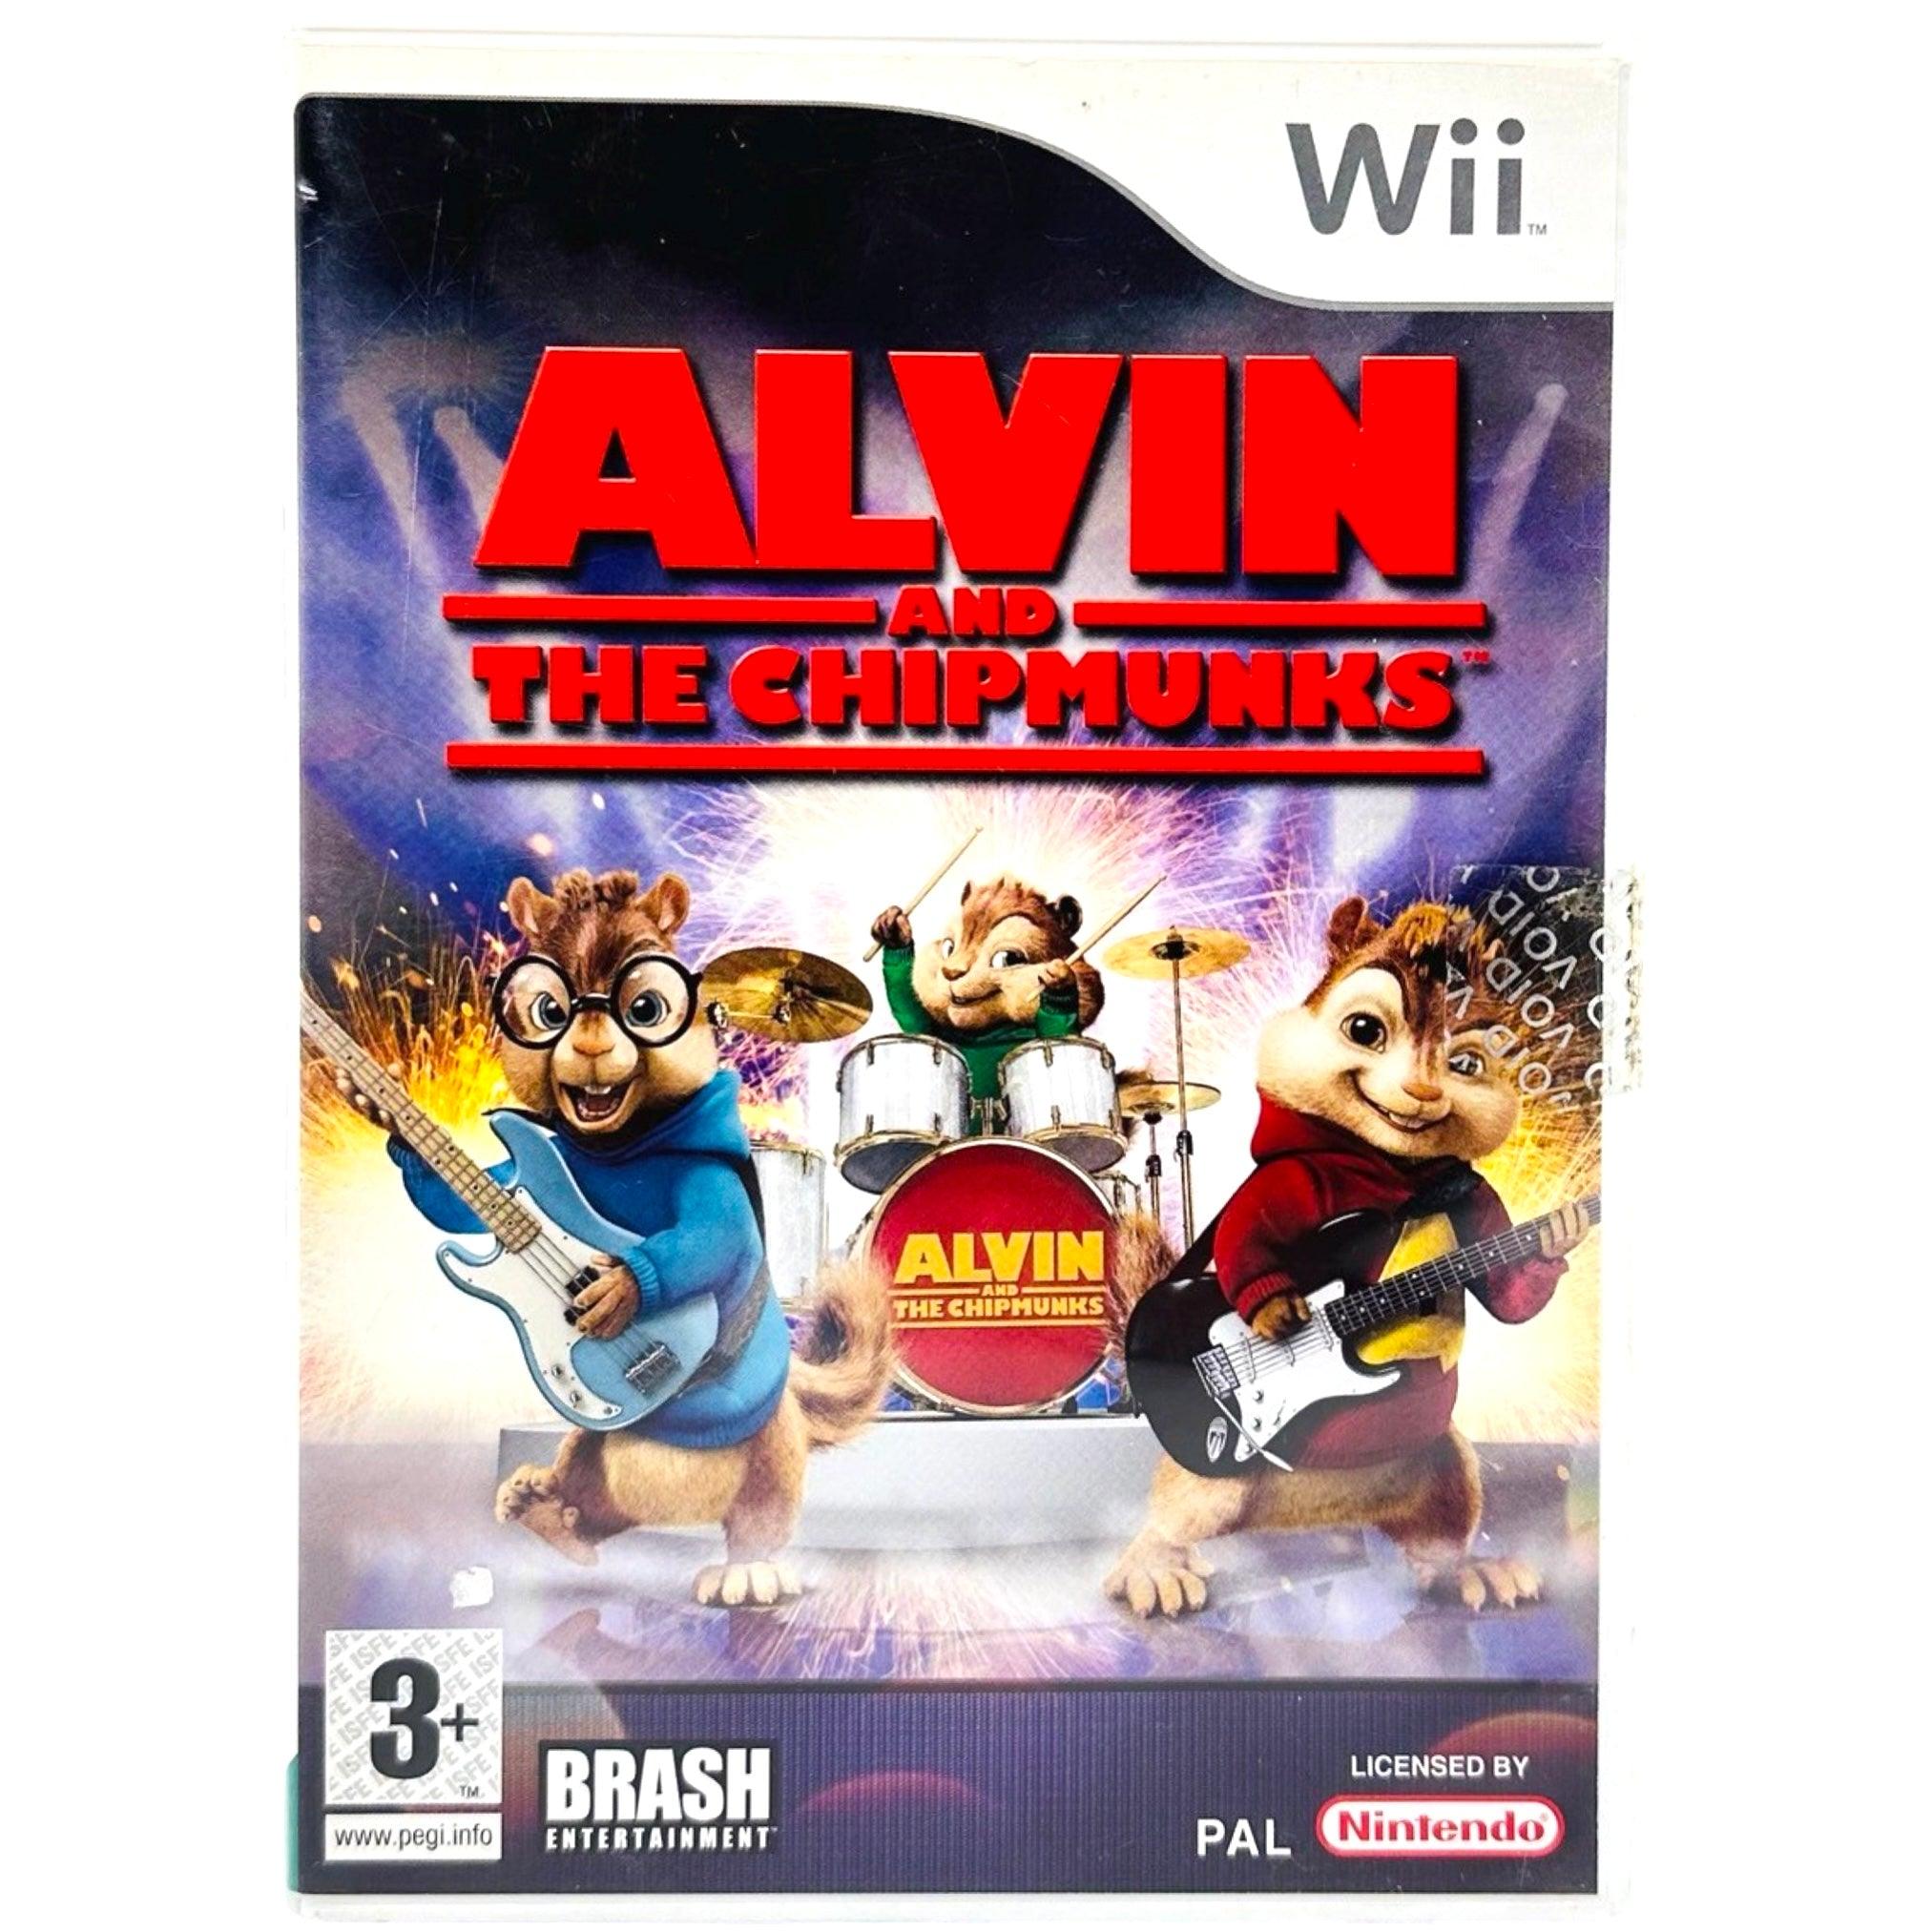 Wii: Alvin And The Chipmunks - RetroGaming.no